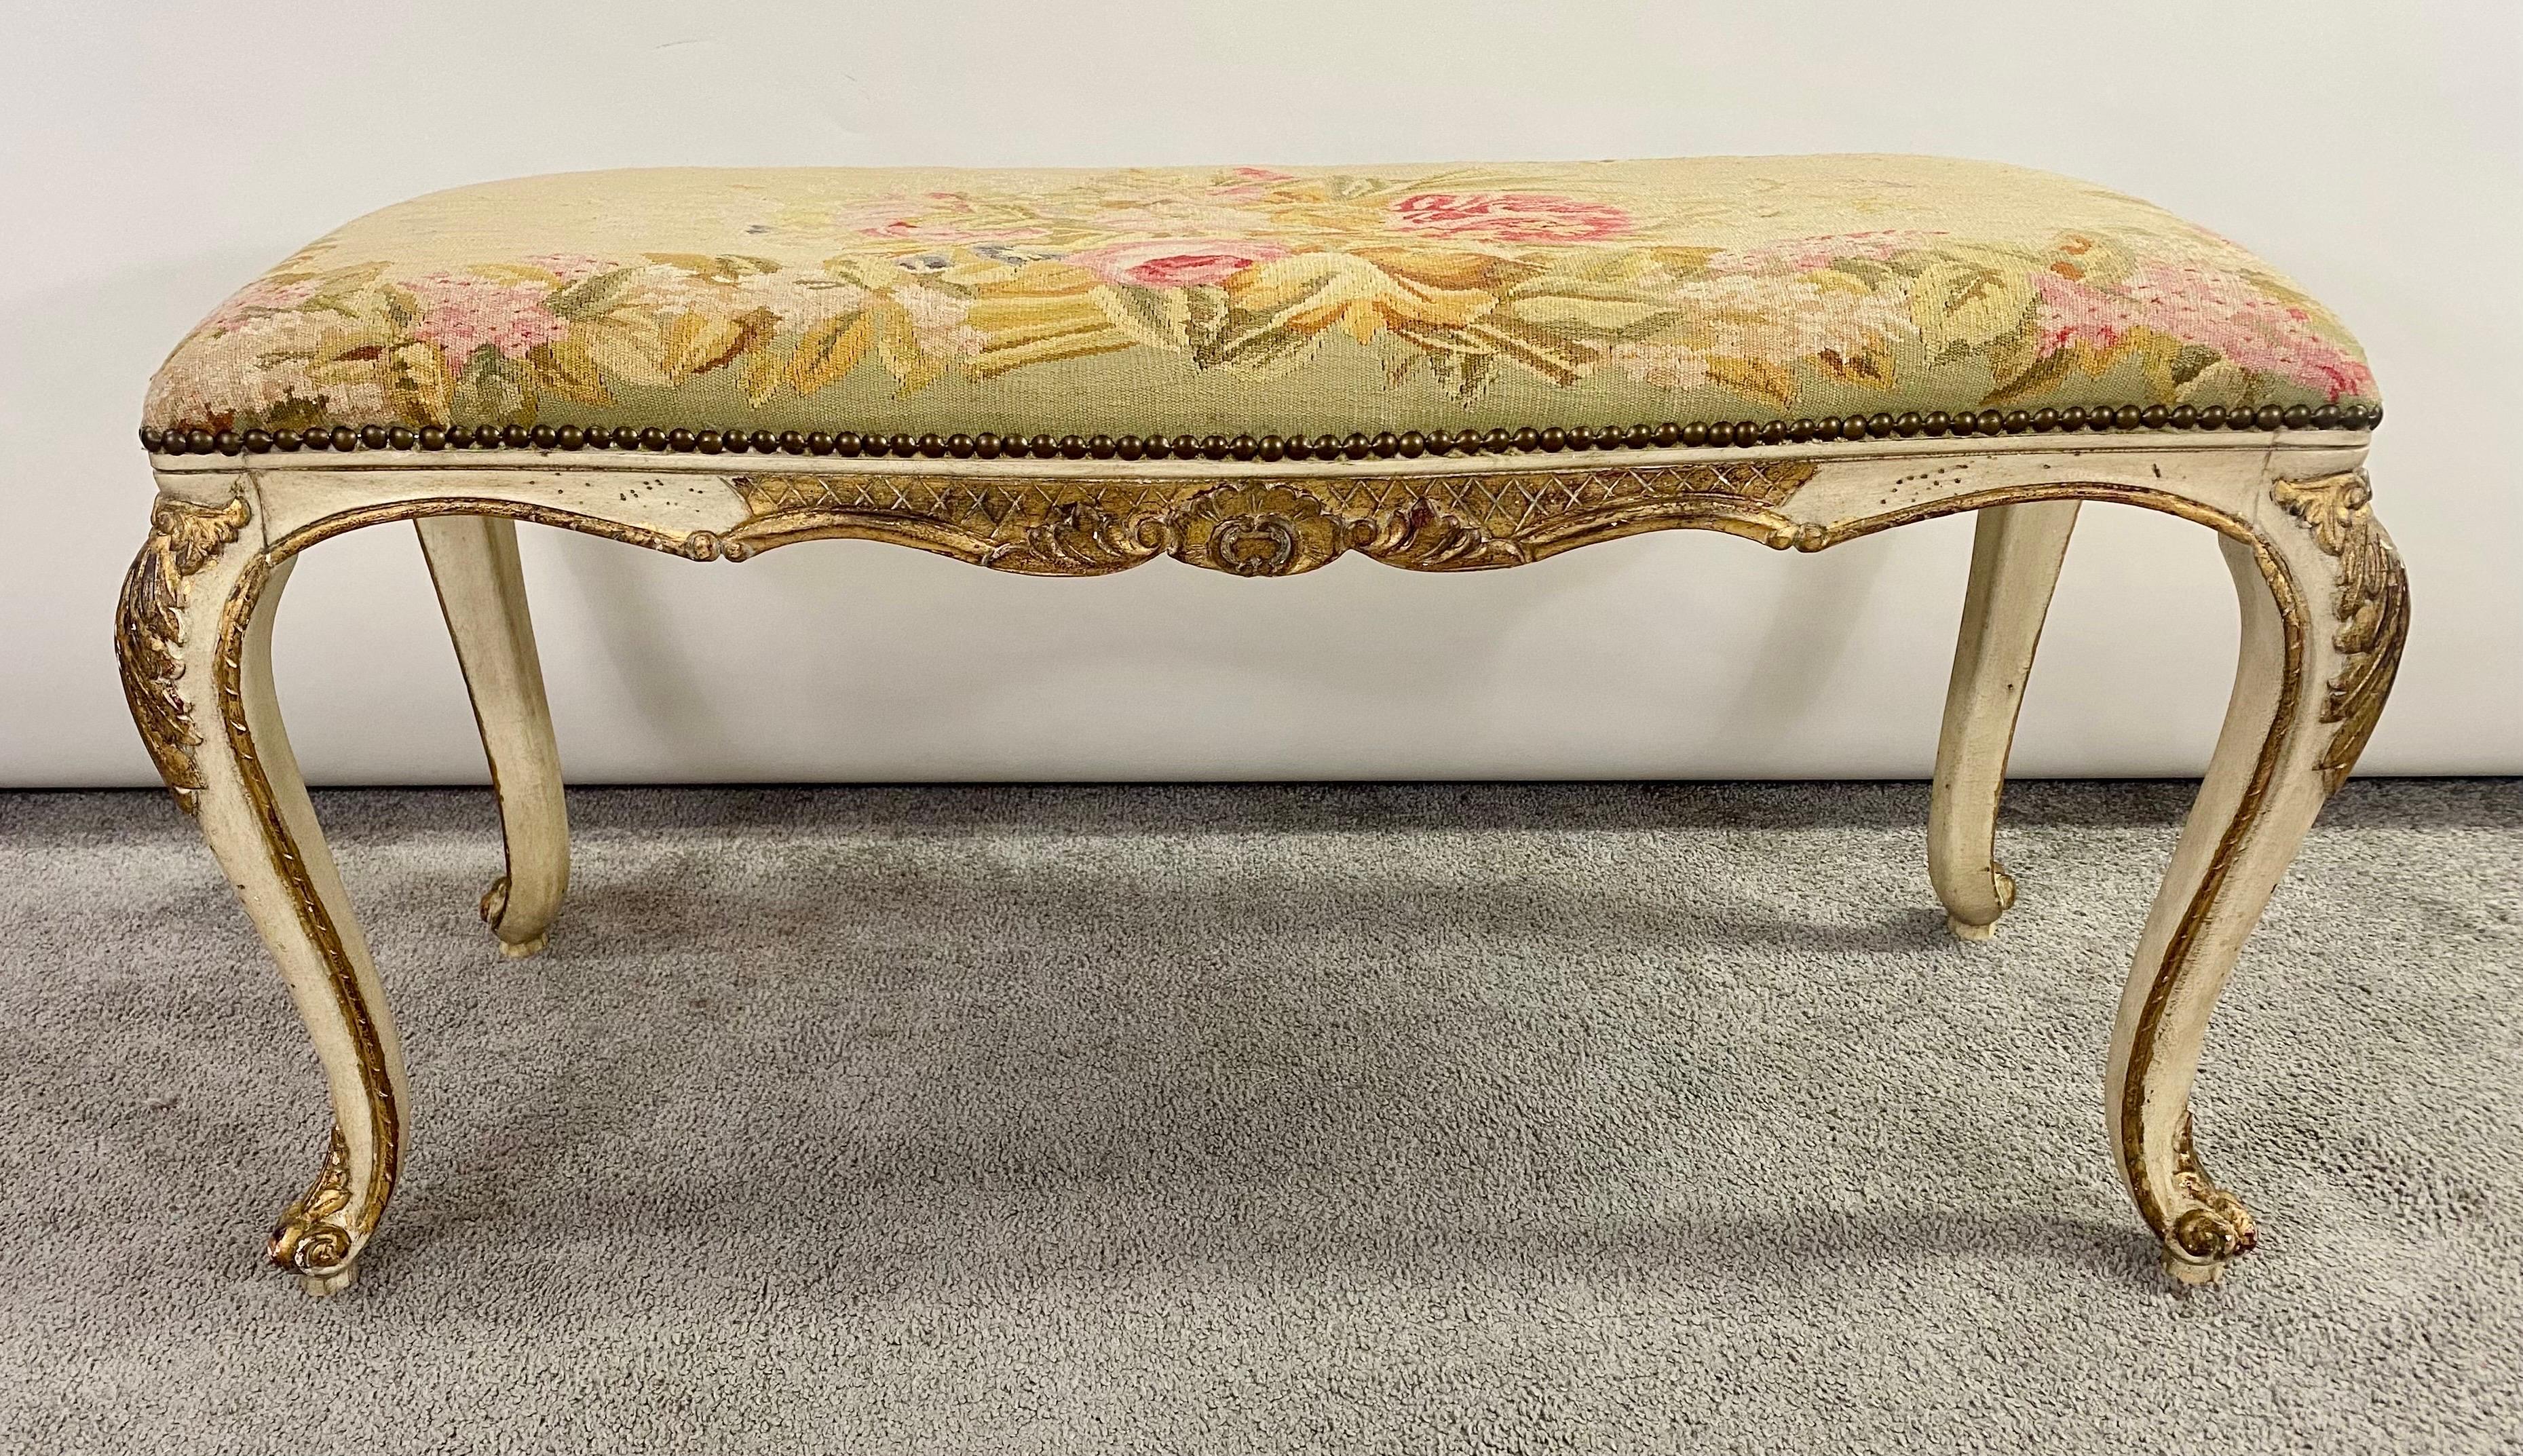 Louis XV style needlepoint bench. The wood frame is nicely hand carved and gilt decorated. The needlepoint cushion features floral design. Timeless and stylish the bench will add elegance to any space of room design. 

DIMENSIONS : 8 x 36 x 16 in.